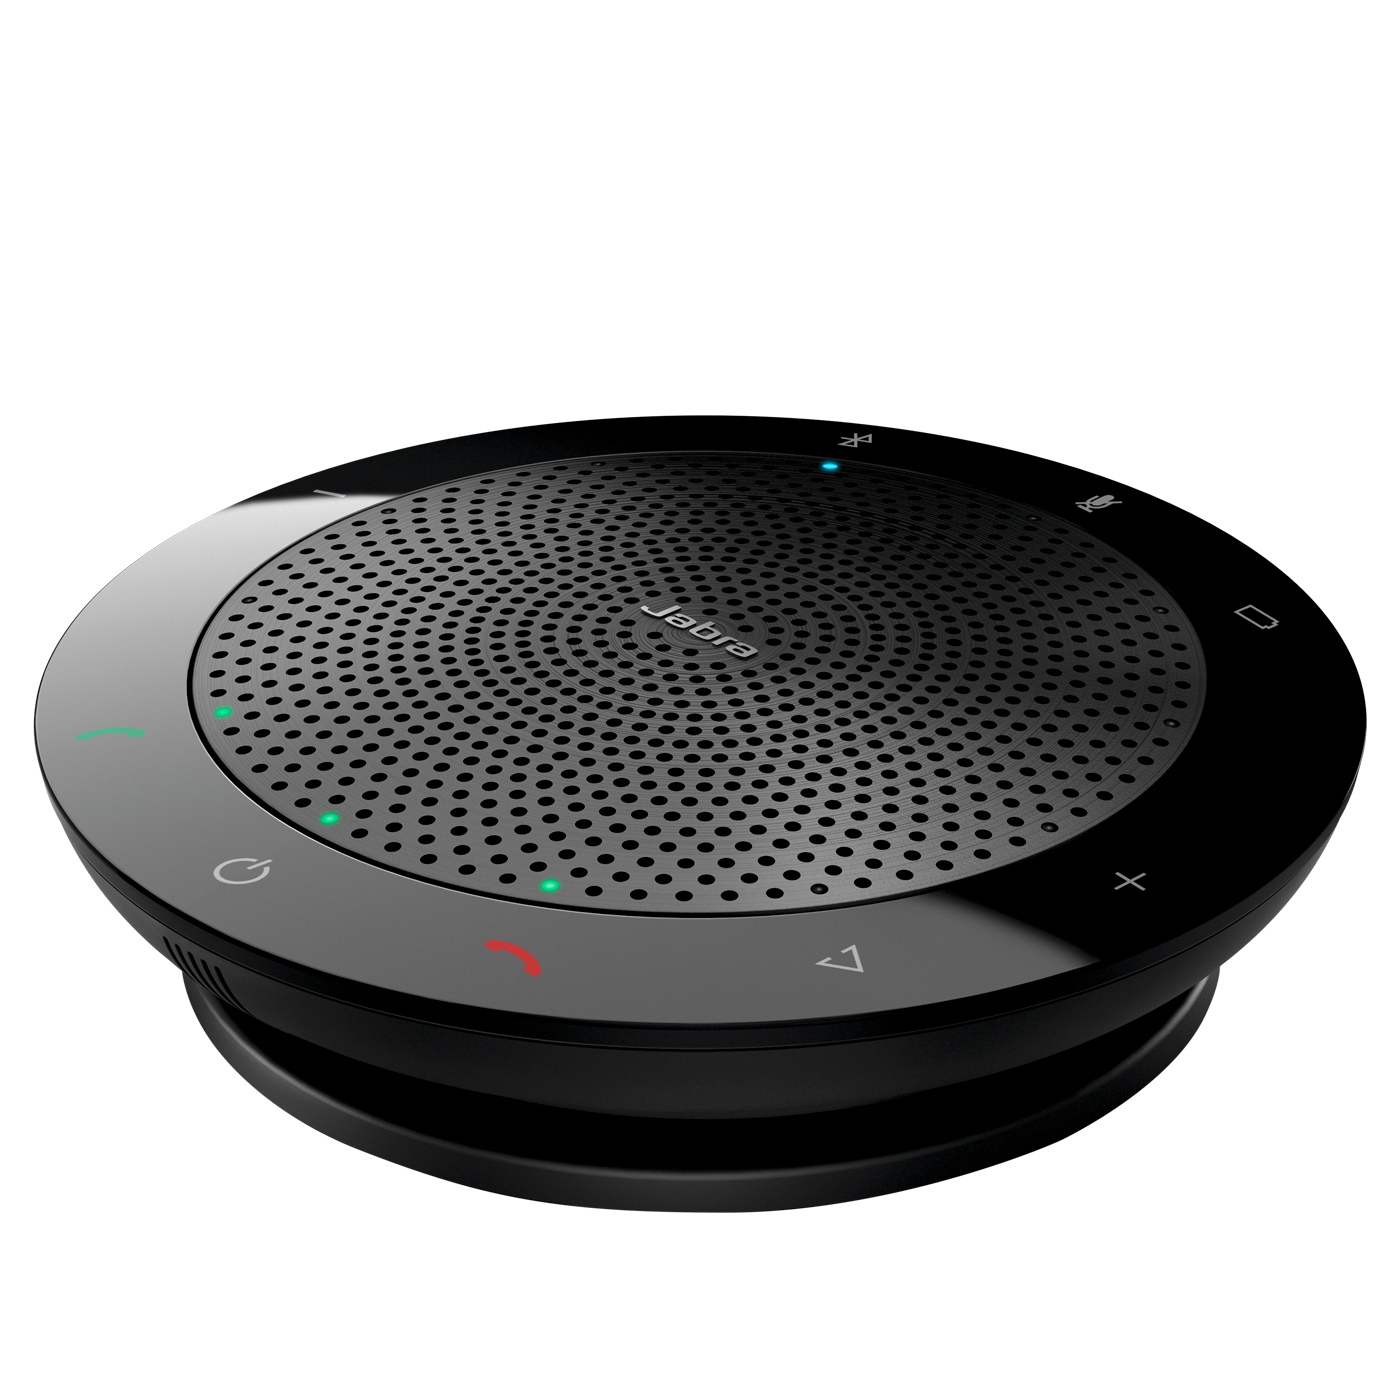 SPEAK 510 MS Bluetooth and USB speakerphone to call and multitask on your terms# at the office. at home. or on the go.Certified by Cisco. Avaya. Siemens